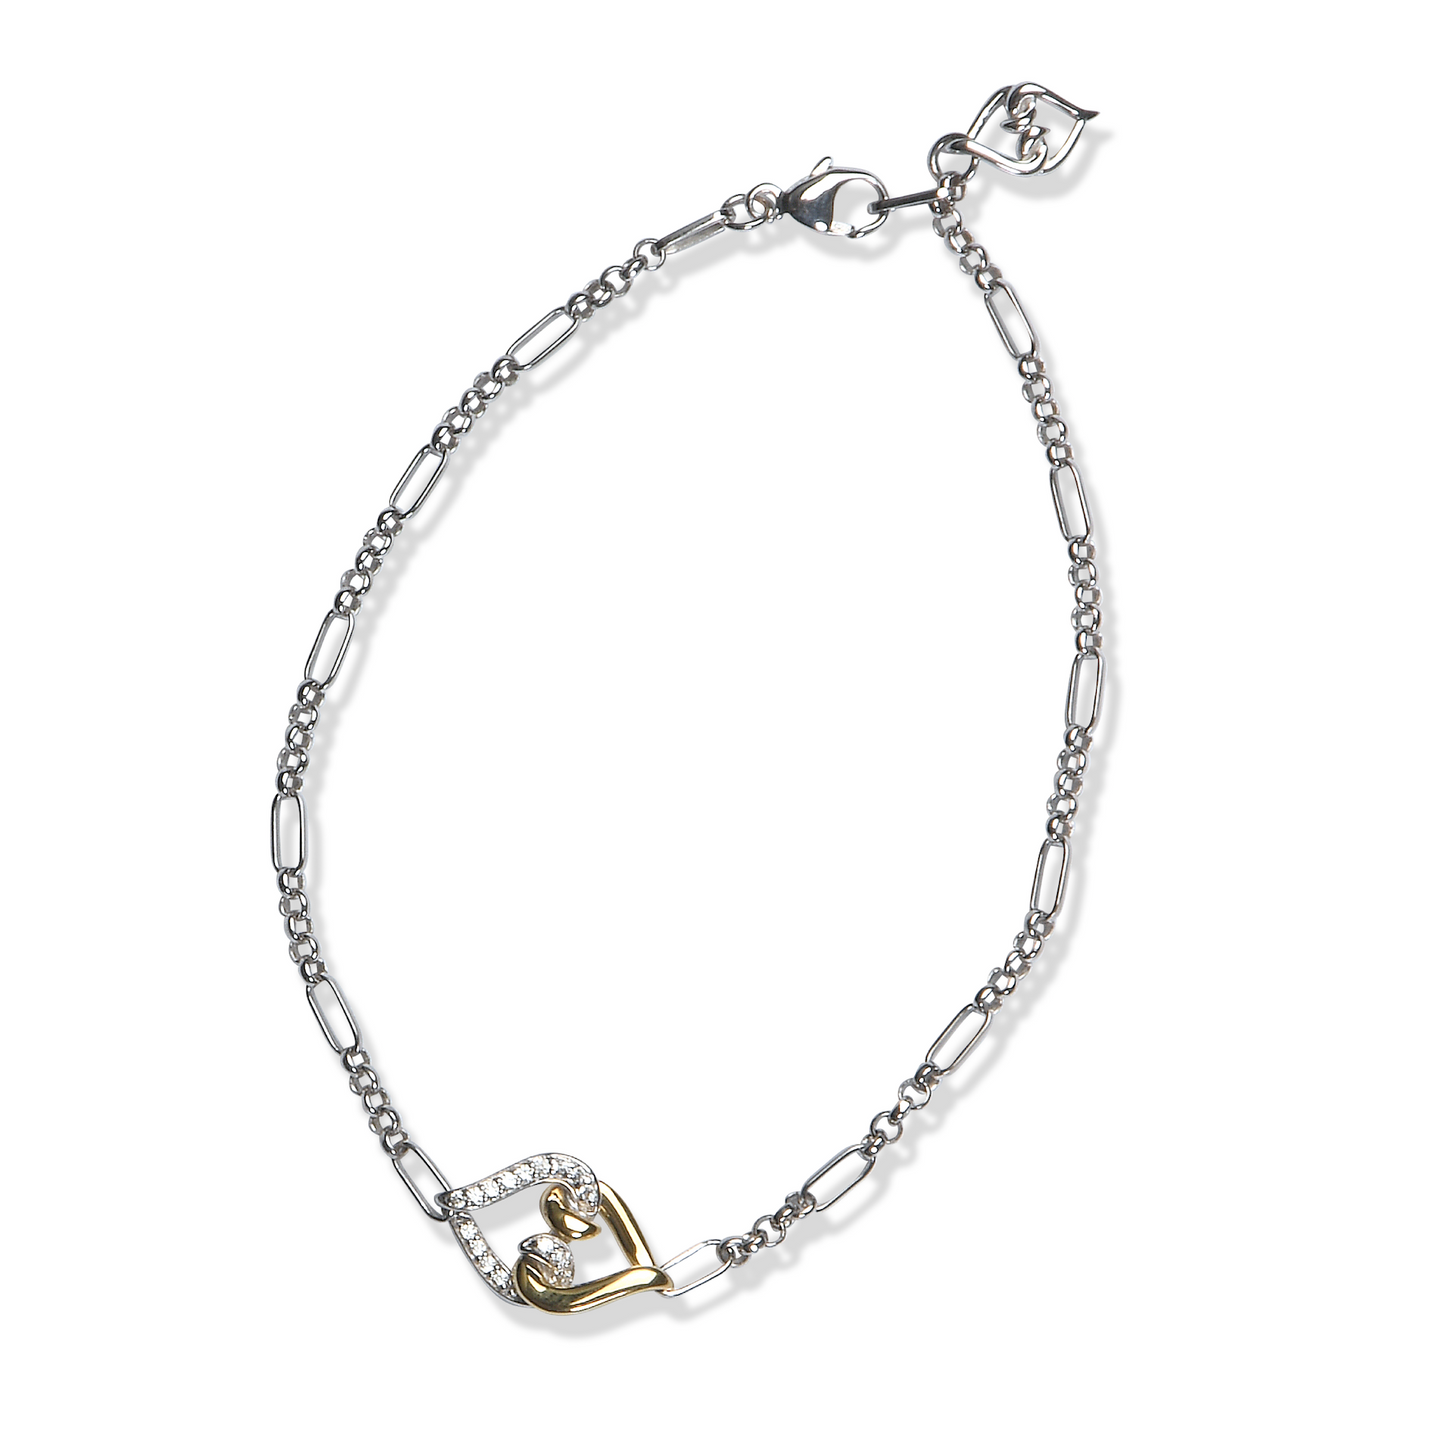 Gold and Silver Diamond Bracelet | Yellow Gold and Sterling Silver Diamond Bracelet